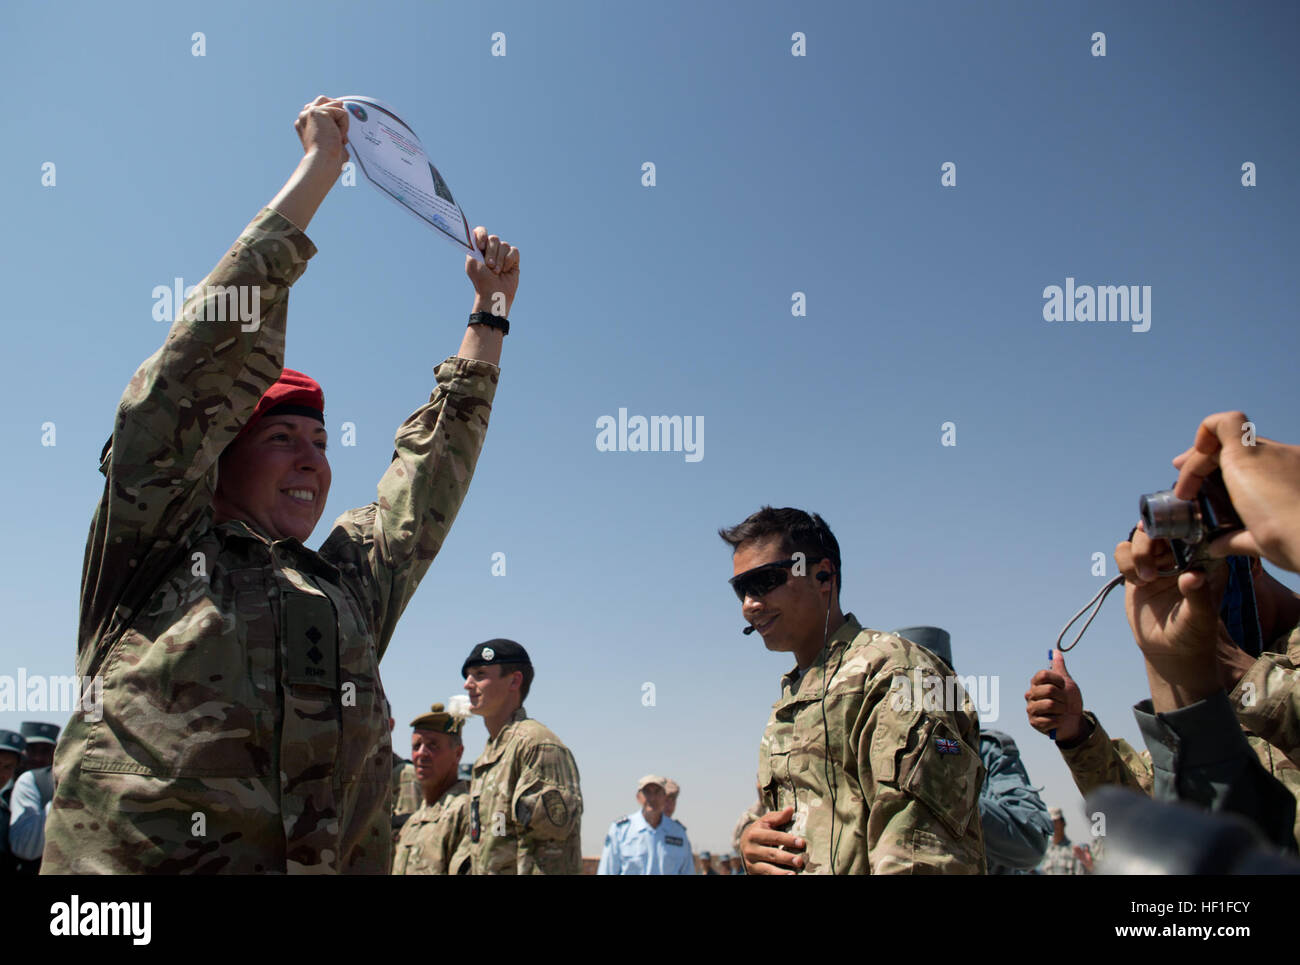 British Army Lieutenant Jess Price, a planning officer with the 3rd military police, receives a letter of appreciation during a ceremony at the Lashkar Gah Training Center (LTC), Helmand province, Afghanistan, Sept. 10, 2013. U.S. Marine Corps Maj. Gen. Walter L. Miller Jr., commanding general of Regional Command (Southwest), and other staff visited the LTC to attend a ribbon cutting ceremony for the opening of a new training compound. (U.S. Marine Corps Photo by Sgt. Tammy K. Hineline/Released) Lashkar Gah Training Center Opening 130910-M-RF397-215 Stock Photo